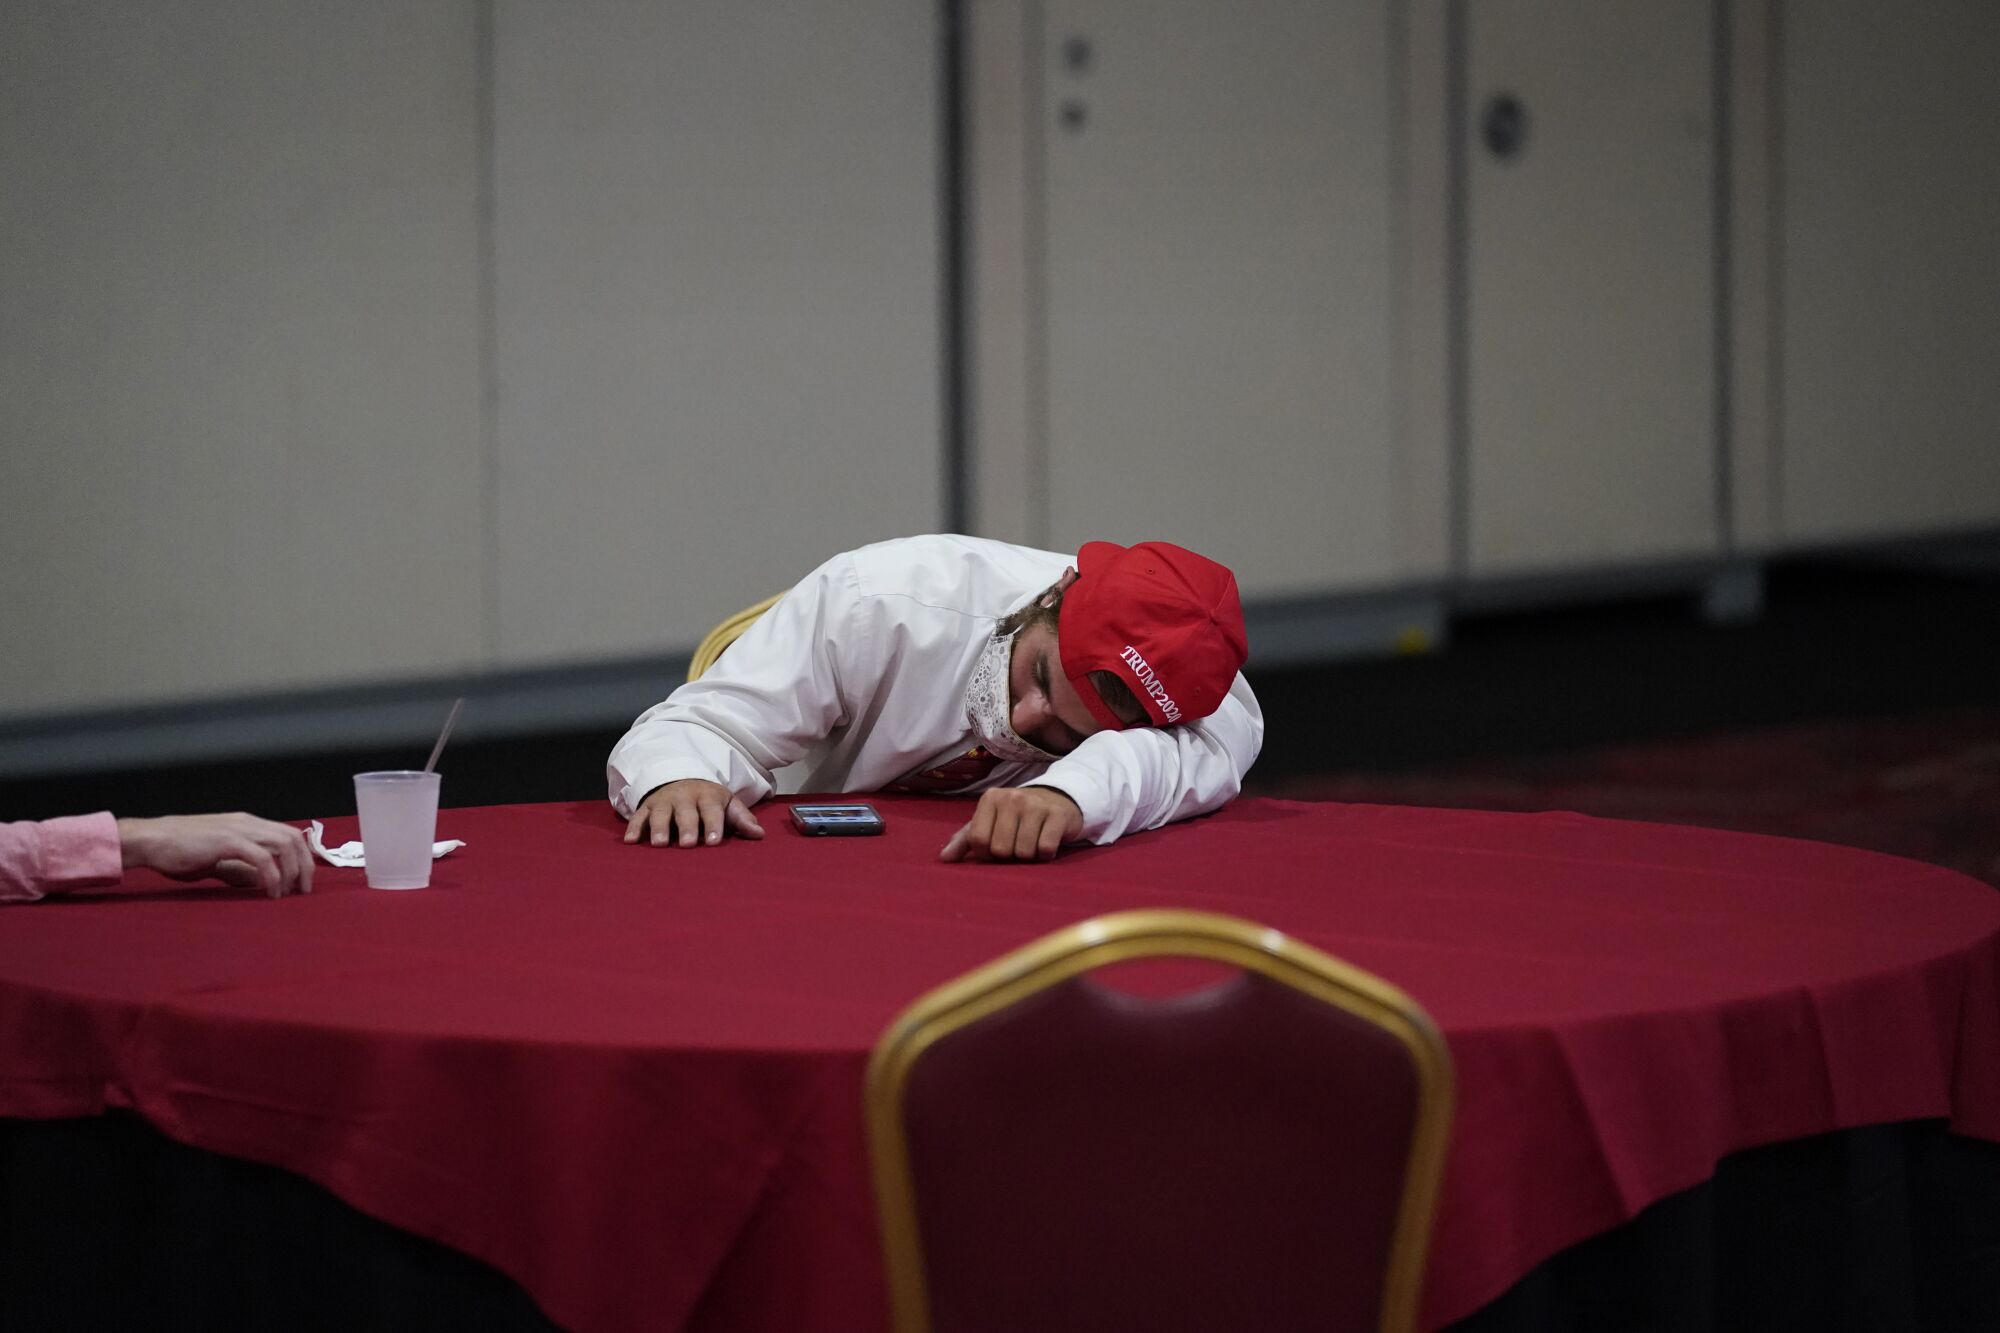 A man in a backwards red Trump 2020 hat rests on a table